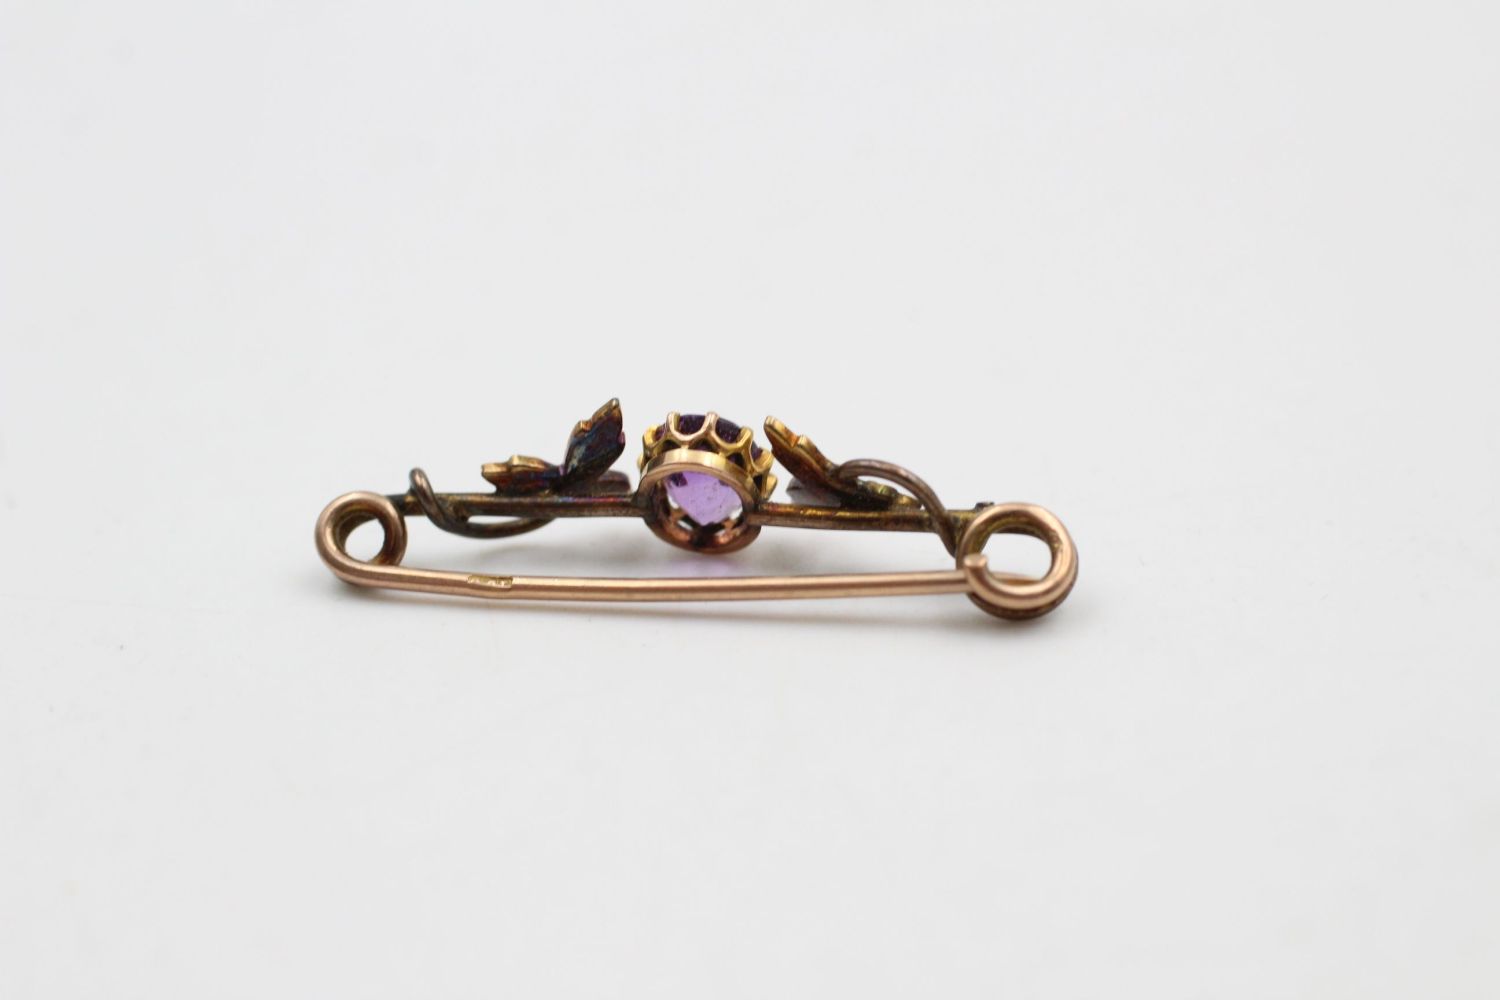 9ct gold amethyst and pearl antique bar brooch 2 grams gross - Image 4 of 4